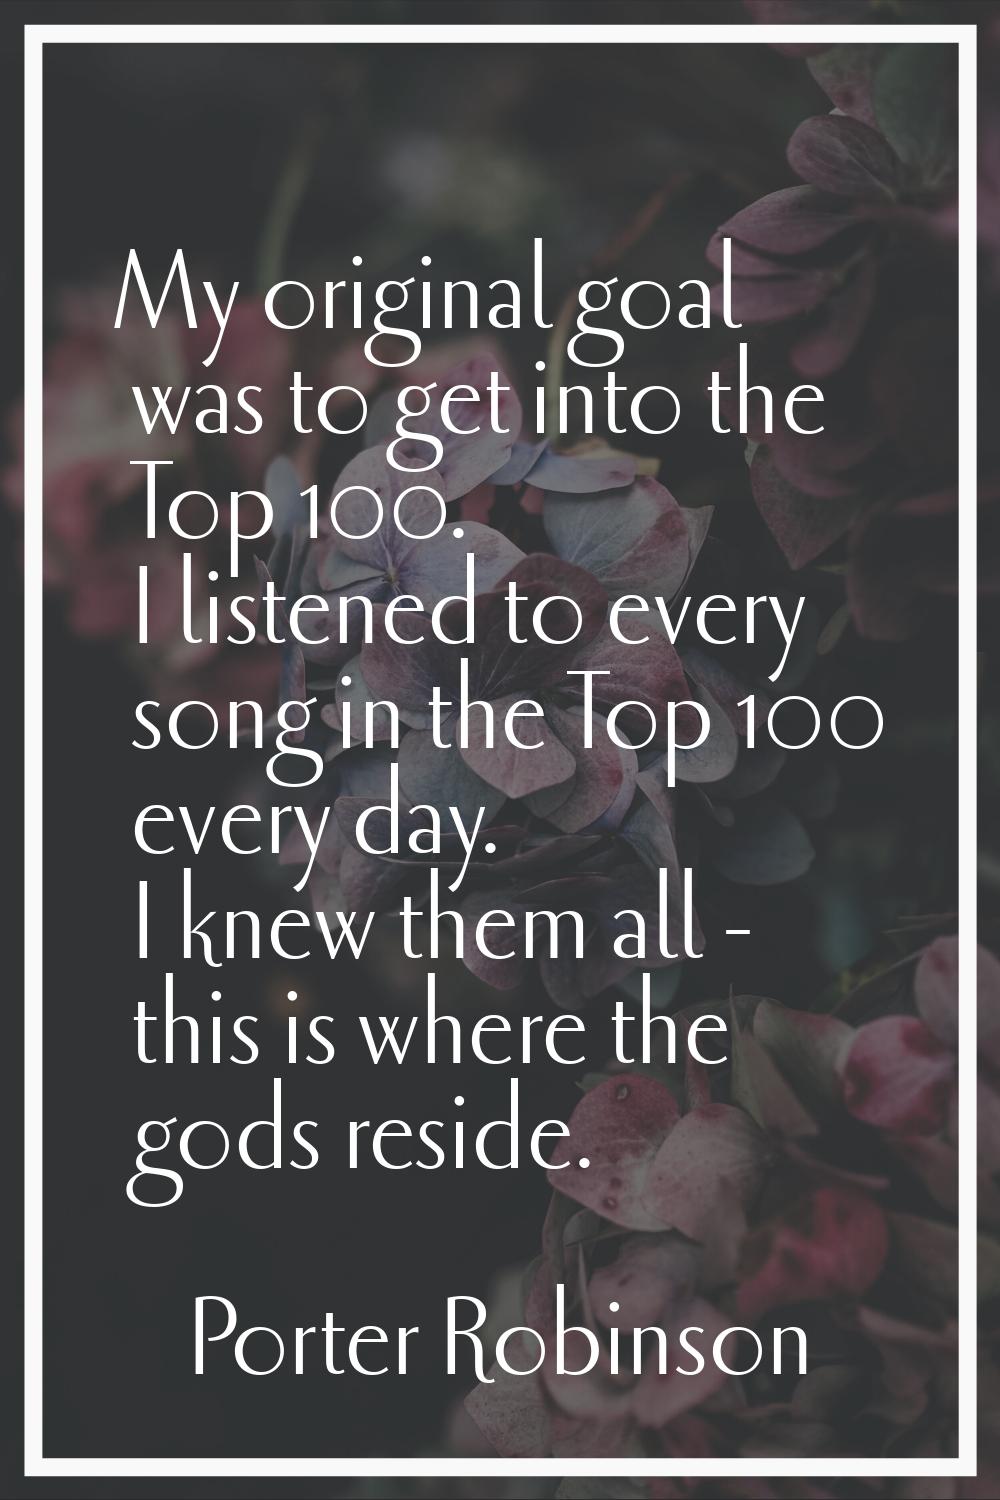 My original goal was to get into the Top 100. I listened to every song in the Top 100 every day. I 